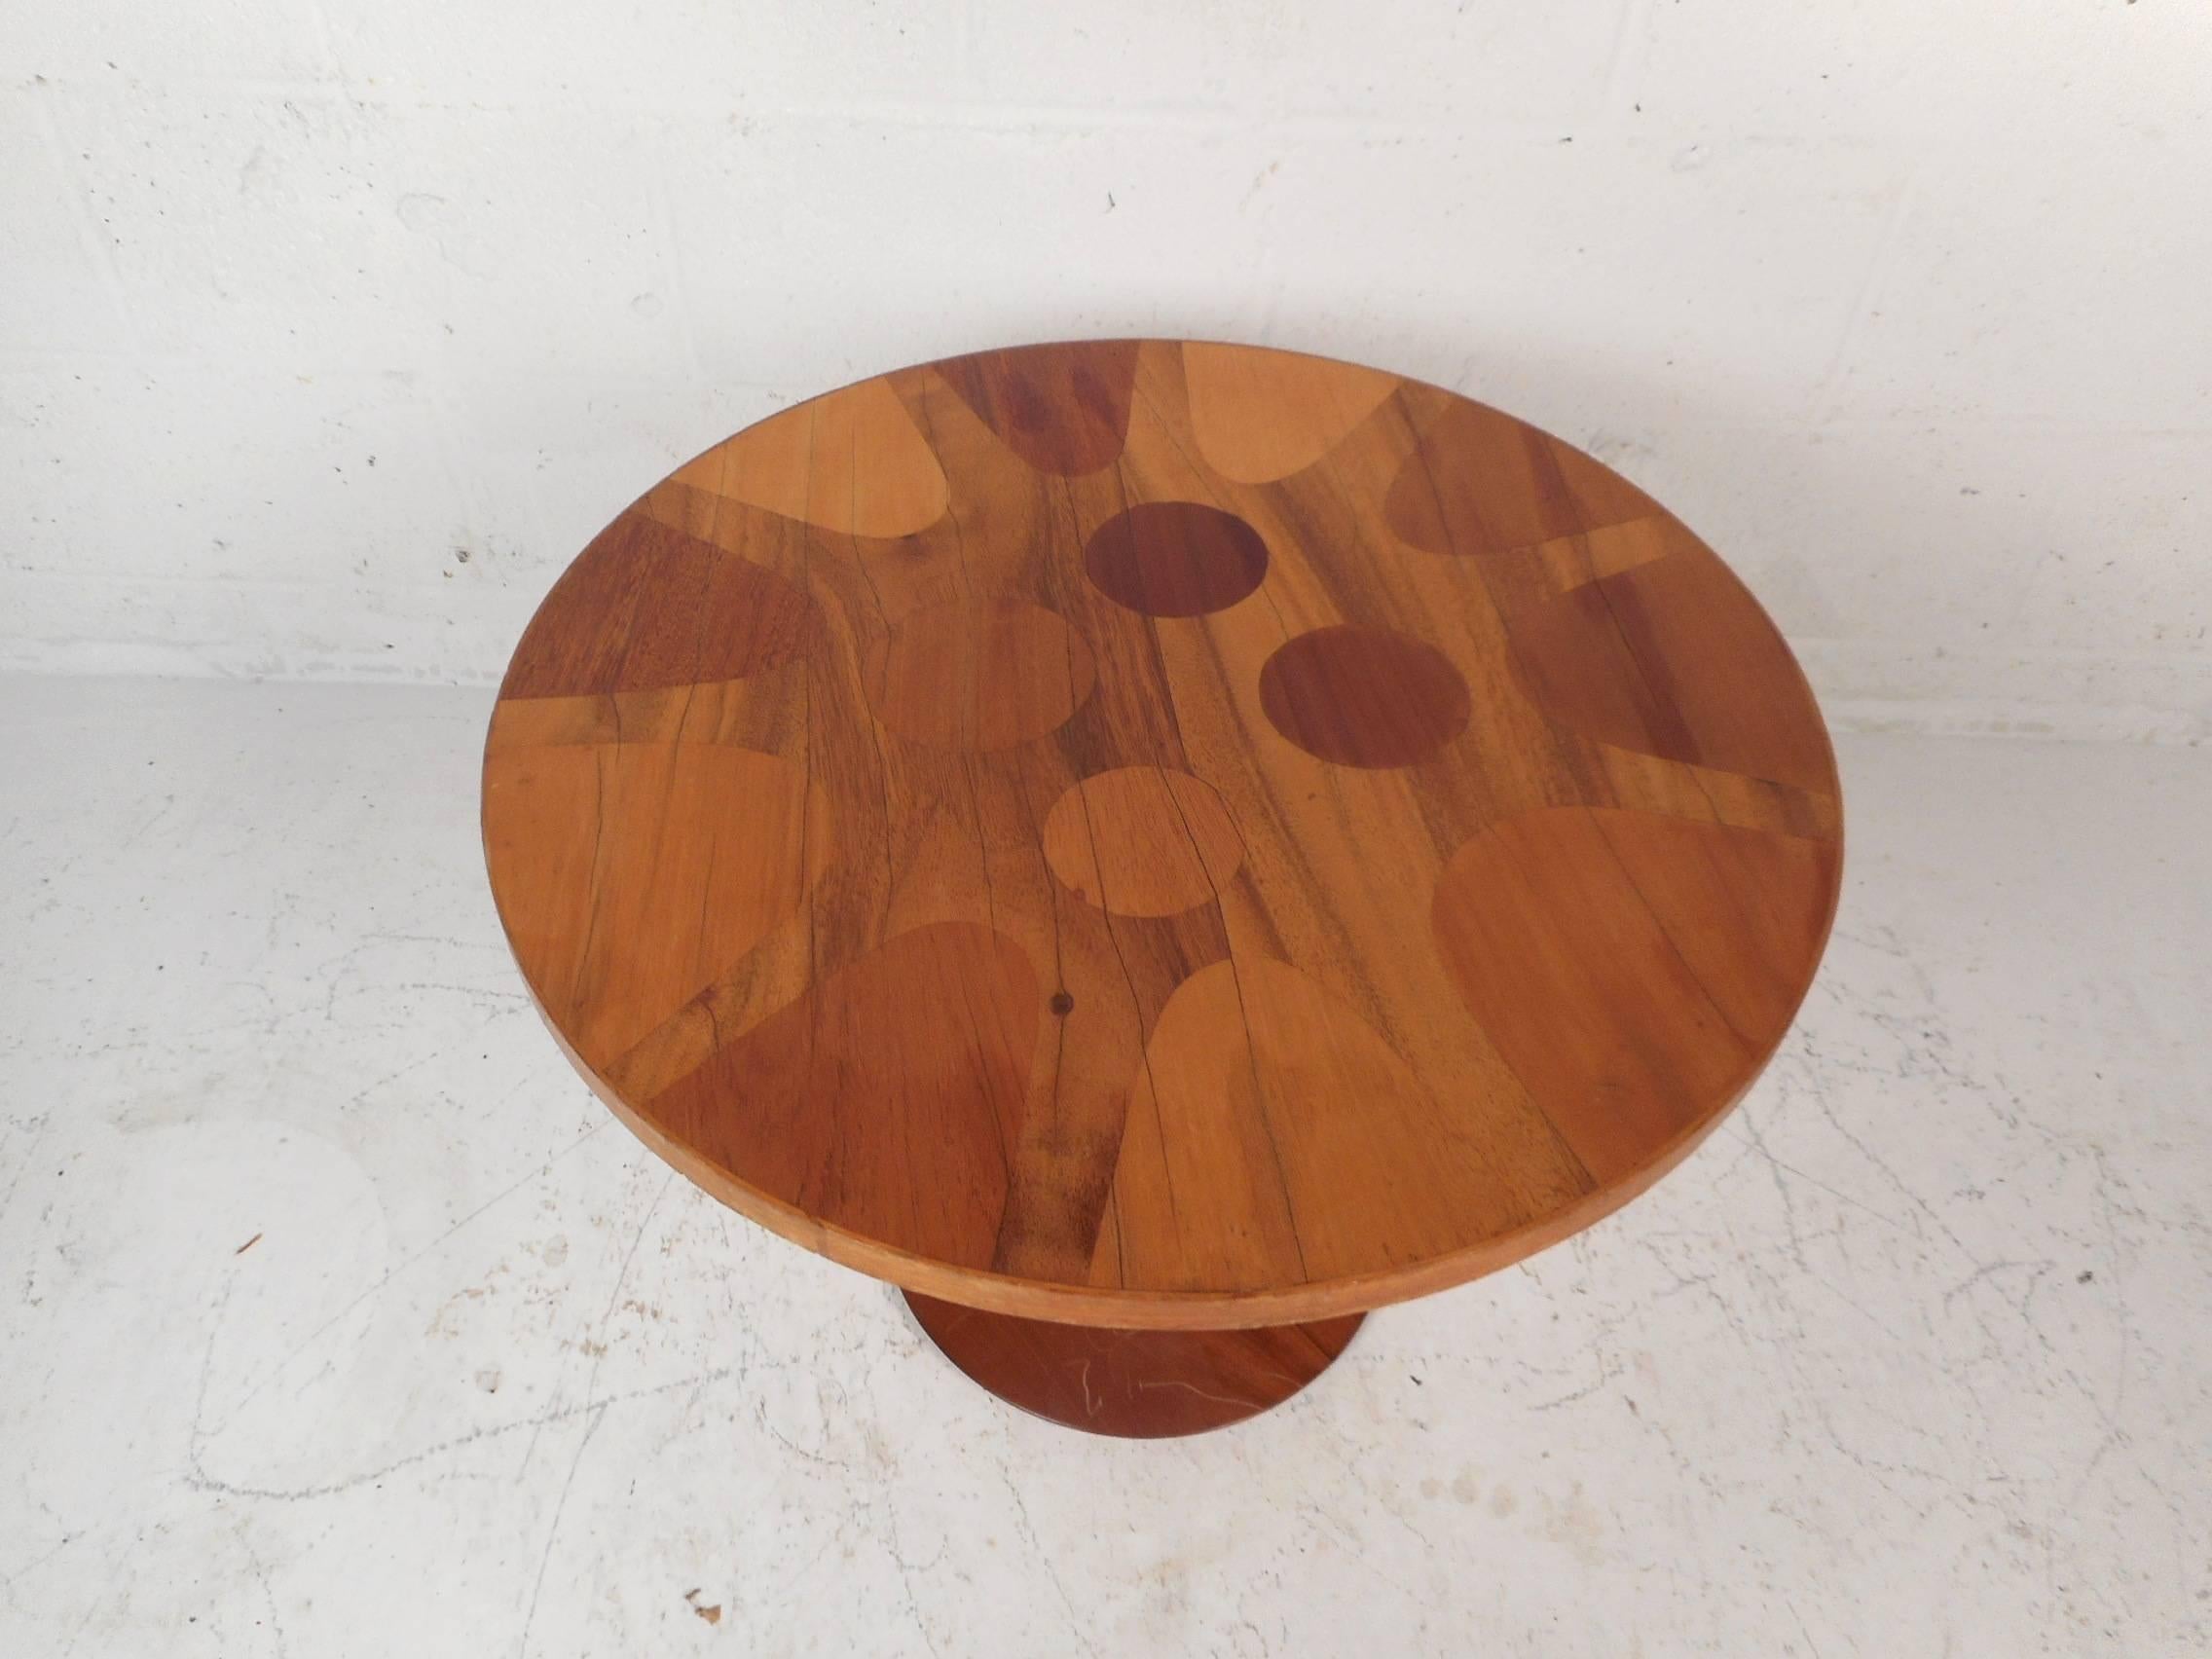 This wonderful vintage modern side table features a round top with unique inlays on a two-tone wood grain. The elegant tulip shape and sturdy round base add to the mid-century appeal. This unusual side table is sure to add style and grace to any